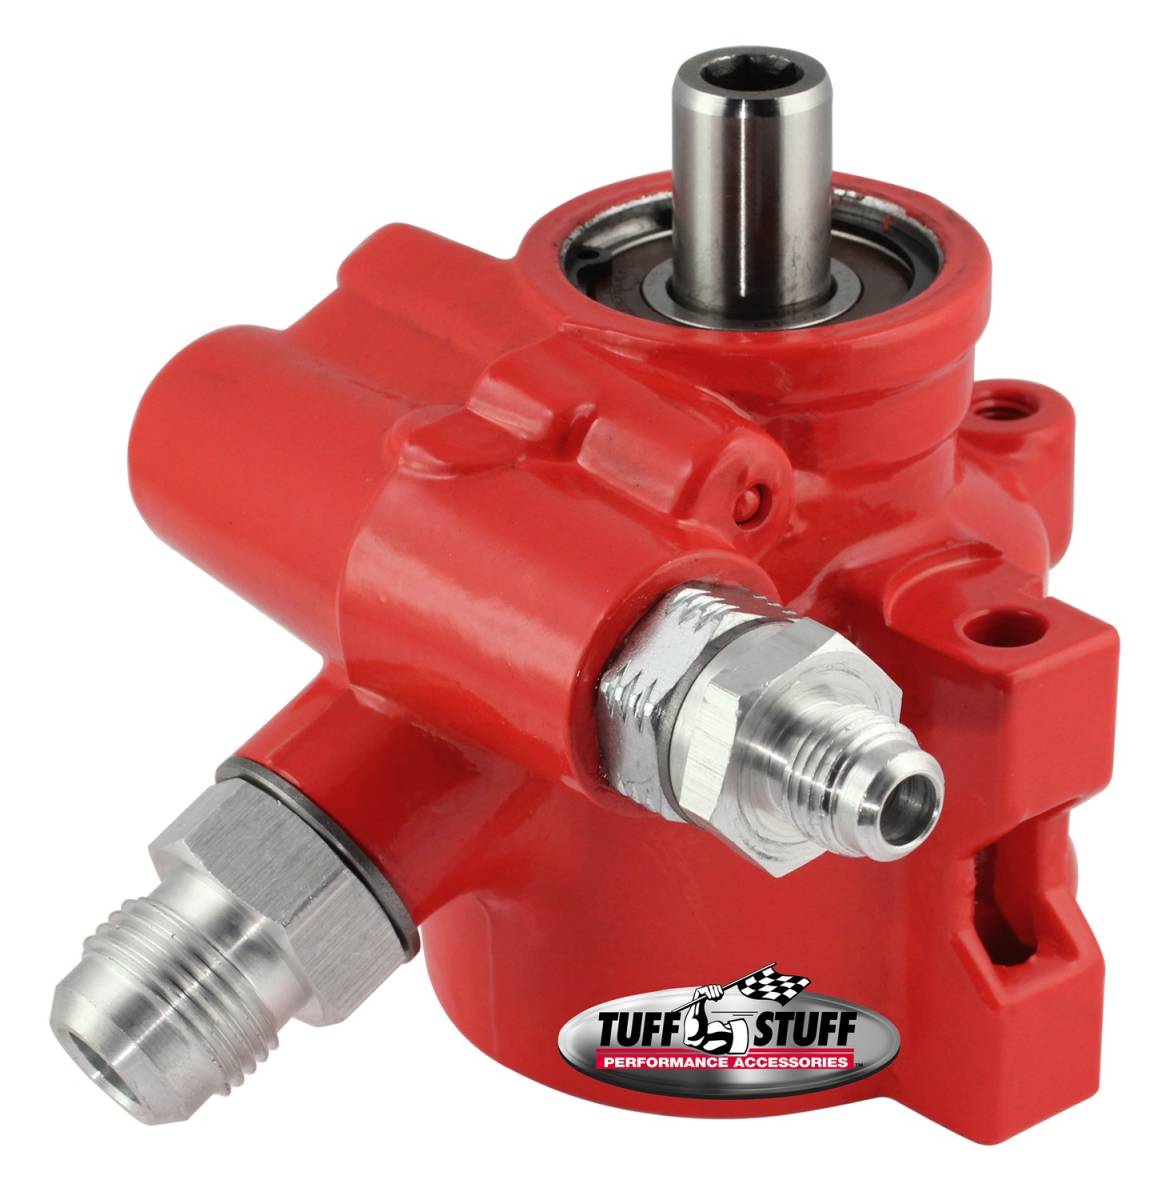 Tuff Stuff Performance - Type II Alum. Power Steering Pump AN-6 And AN-10 Fittings 8mm Through Hole Mounting Aluminum For Street Rods And Custom Vehicles w/Limited Engine Space Red 6175ALRED